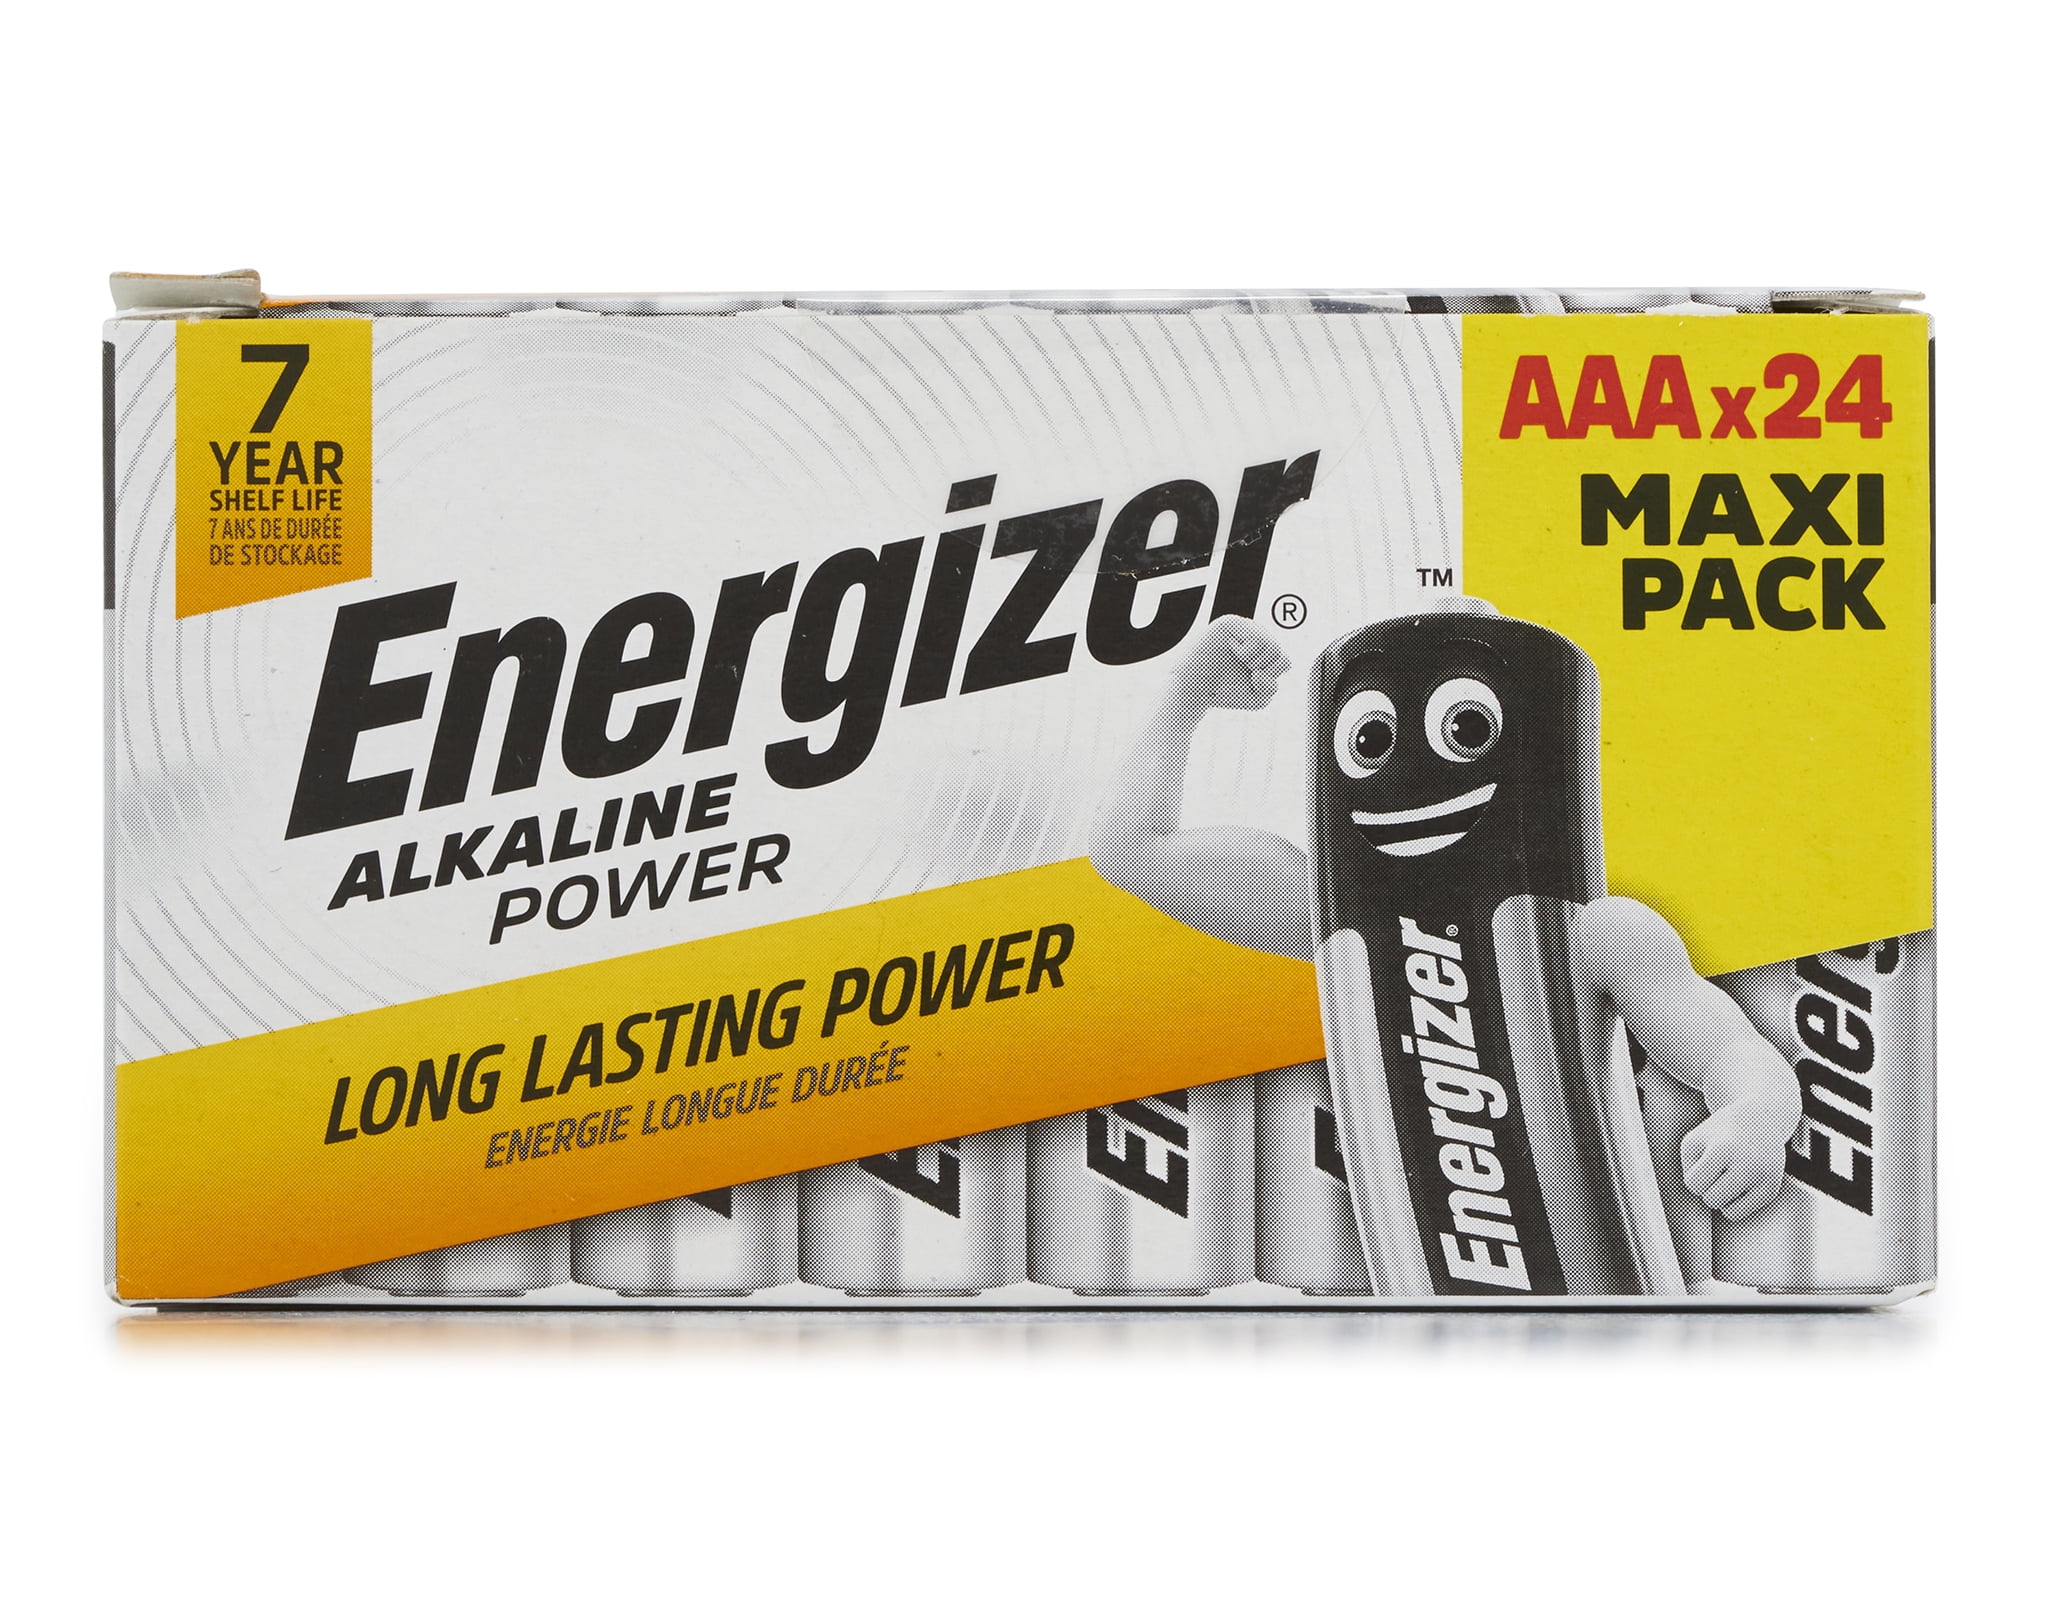 Energizer AAA Batteries, Alkaline Power, 24 Pack, Triple A Battery Pack -   Exclusive (Packaging may vary)